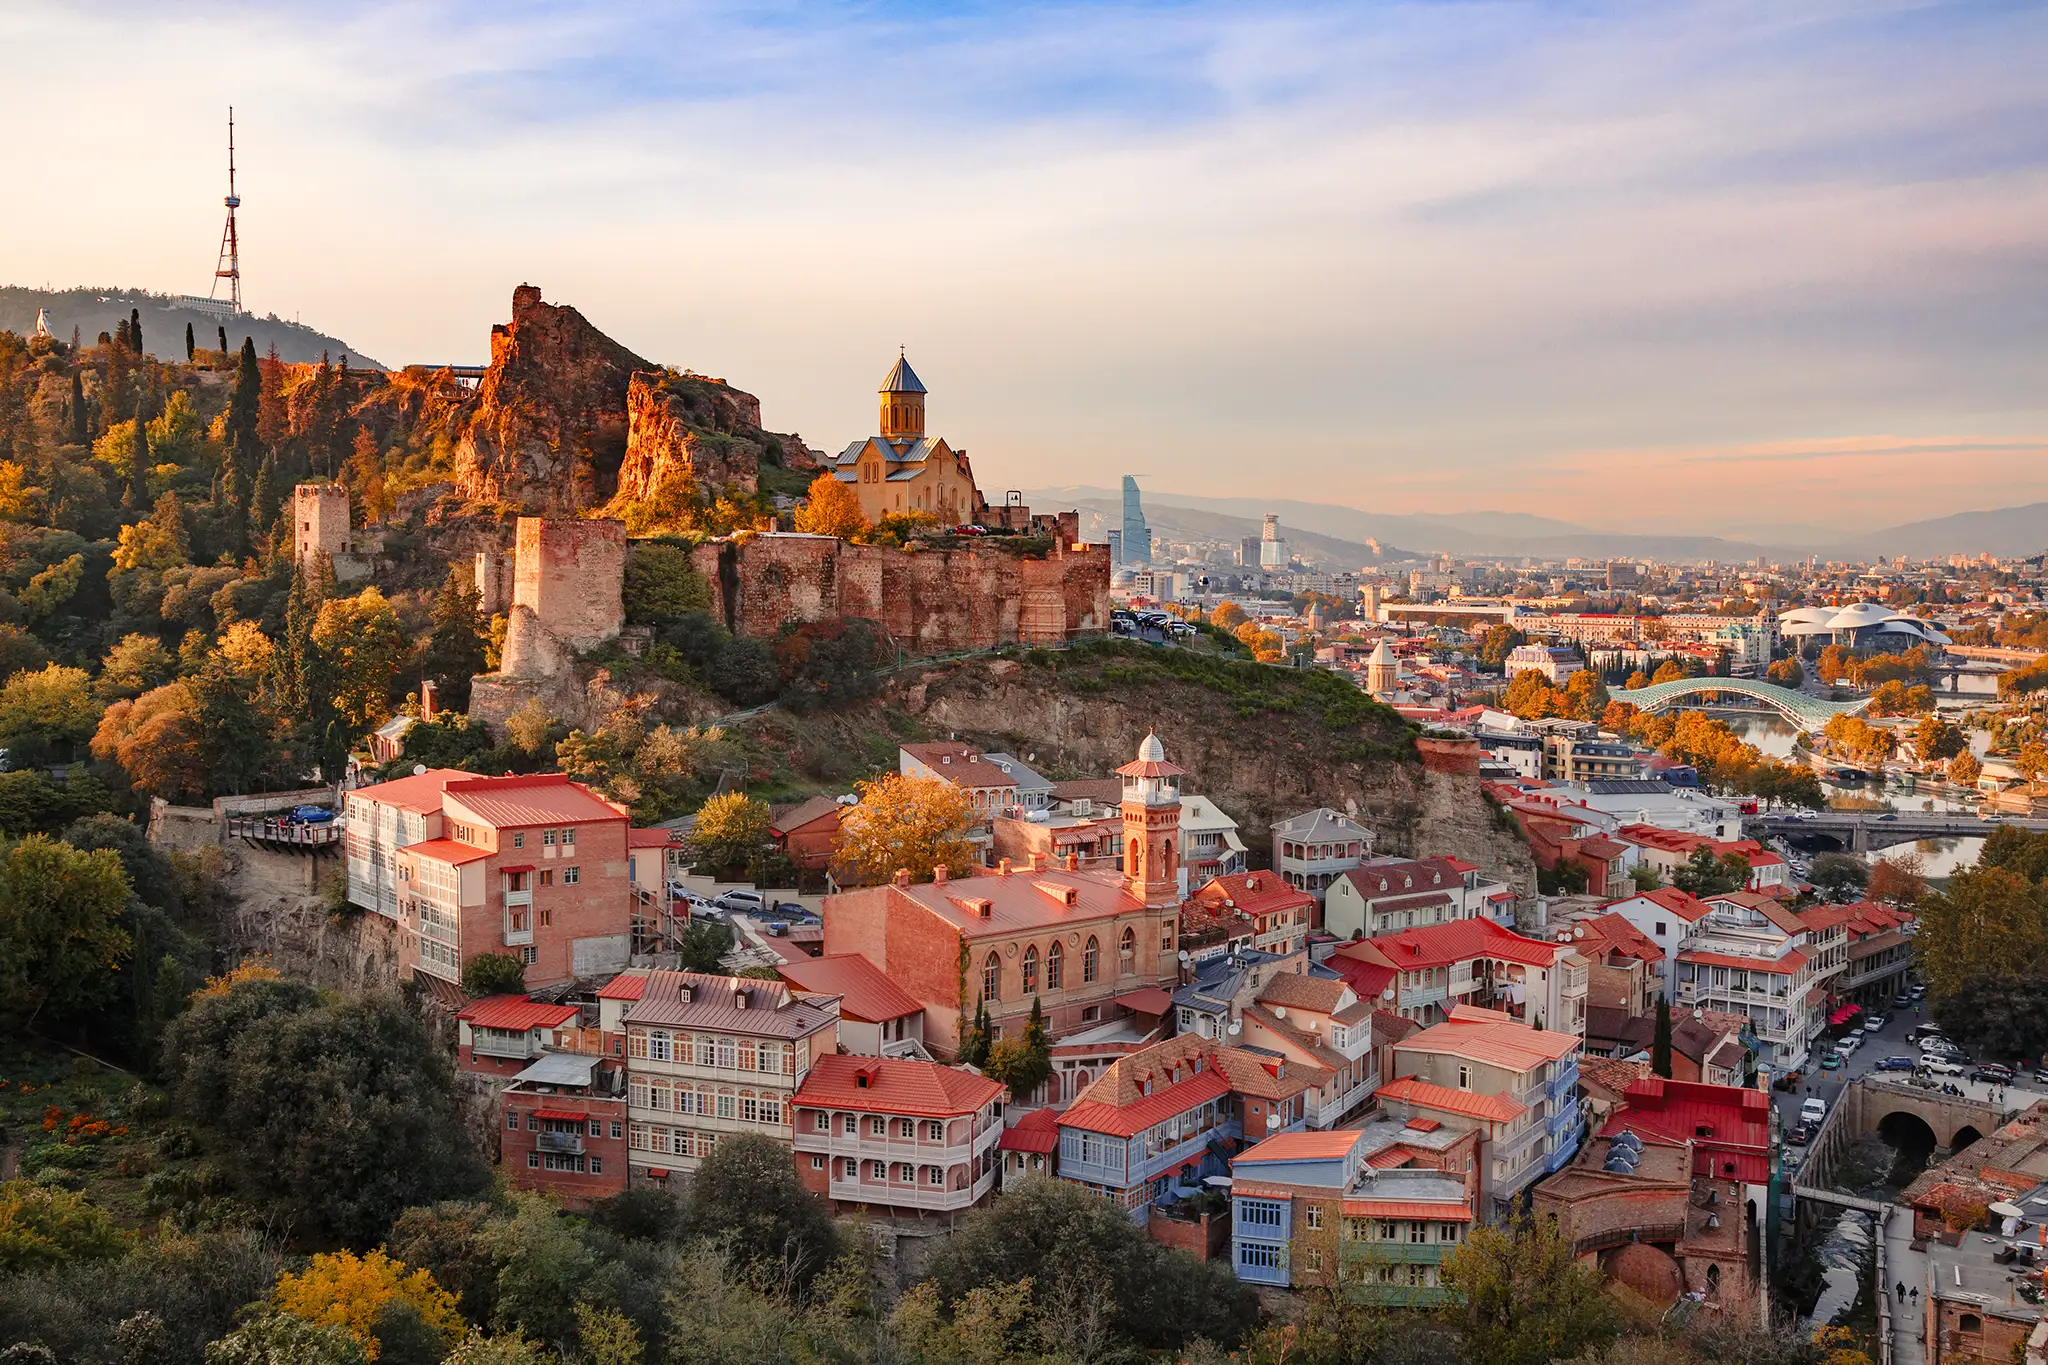 Beautiful sunset view of Old Tbilisi from the hill.